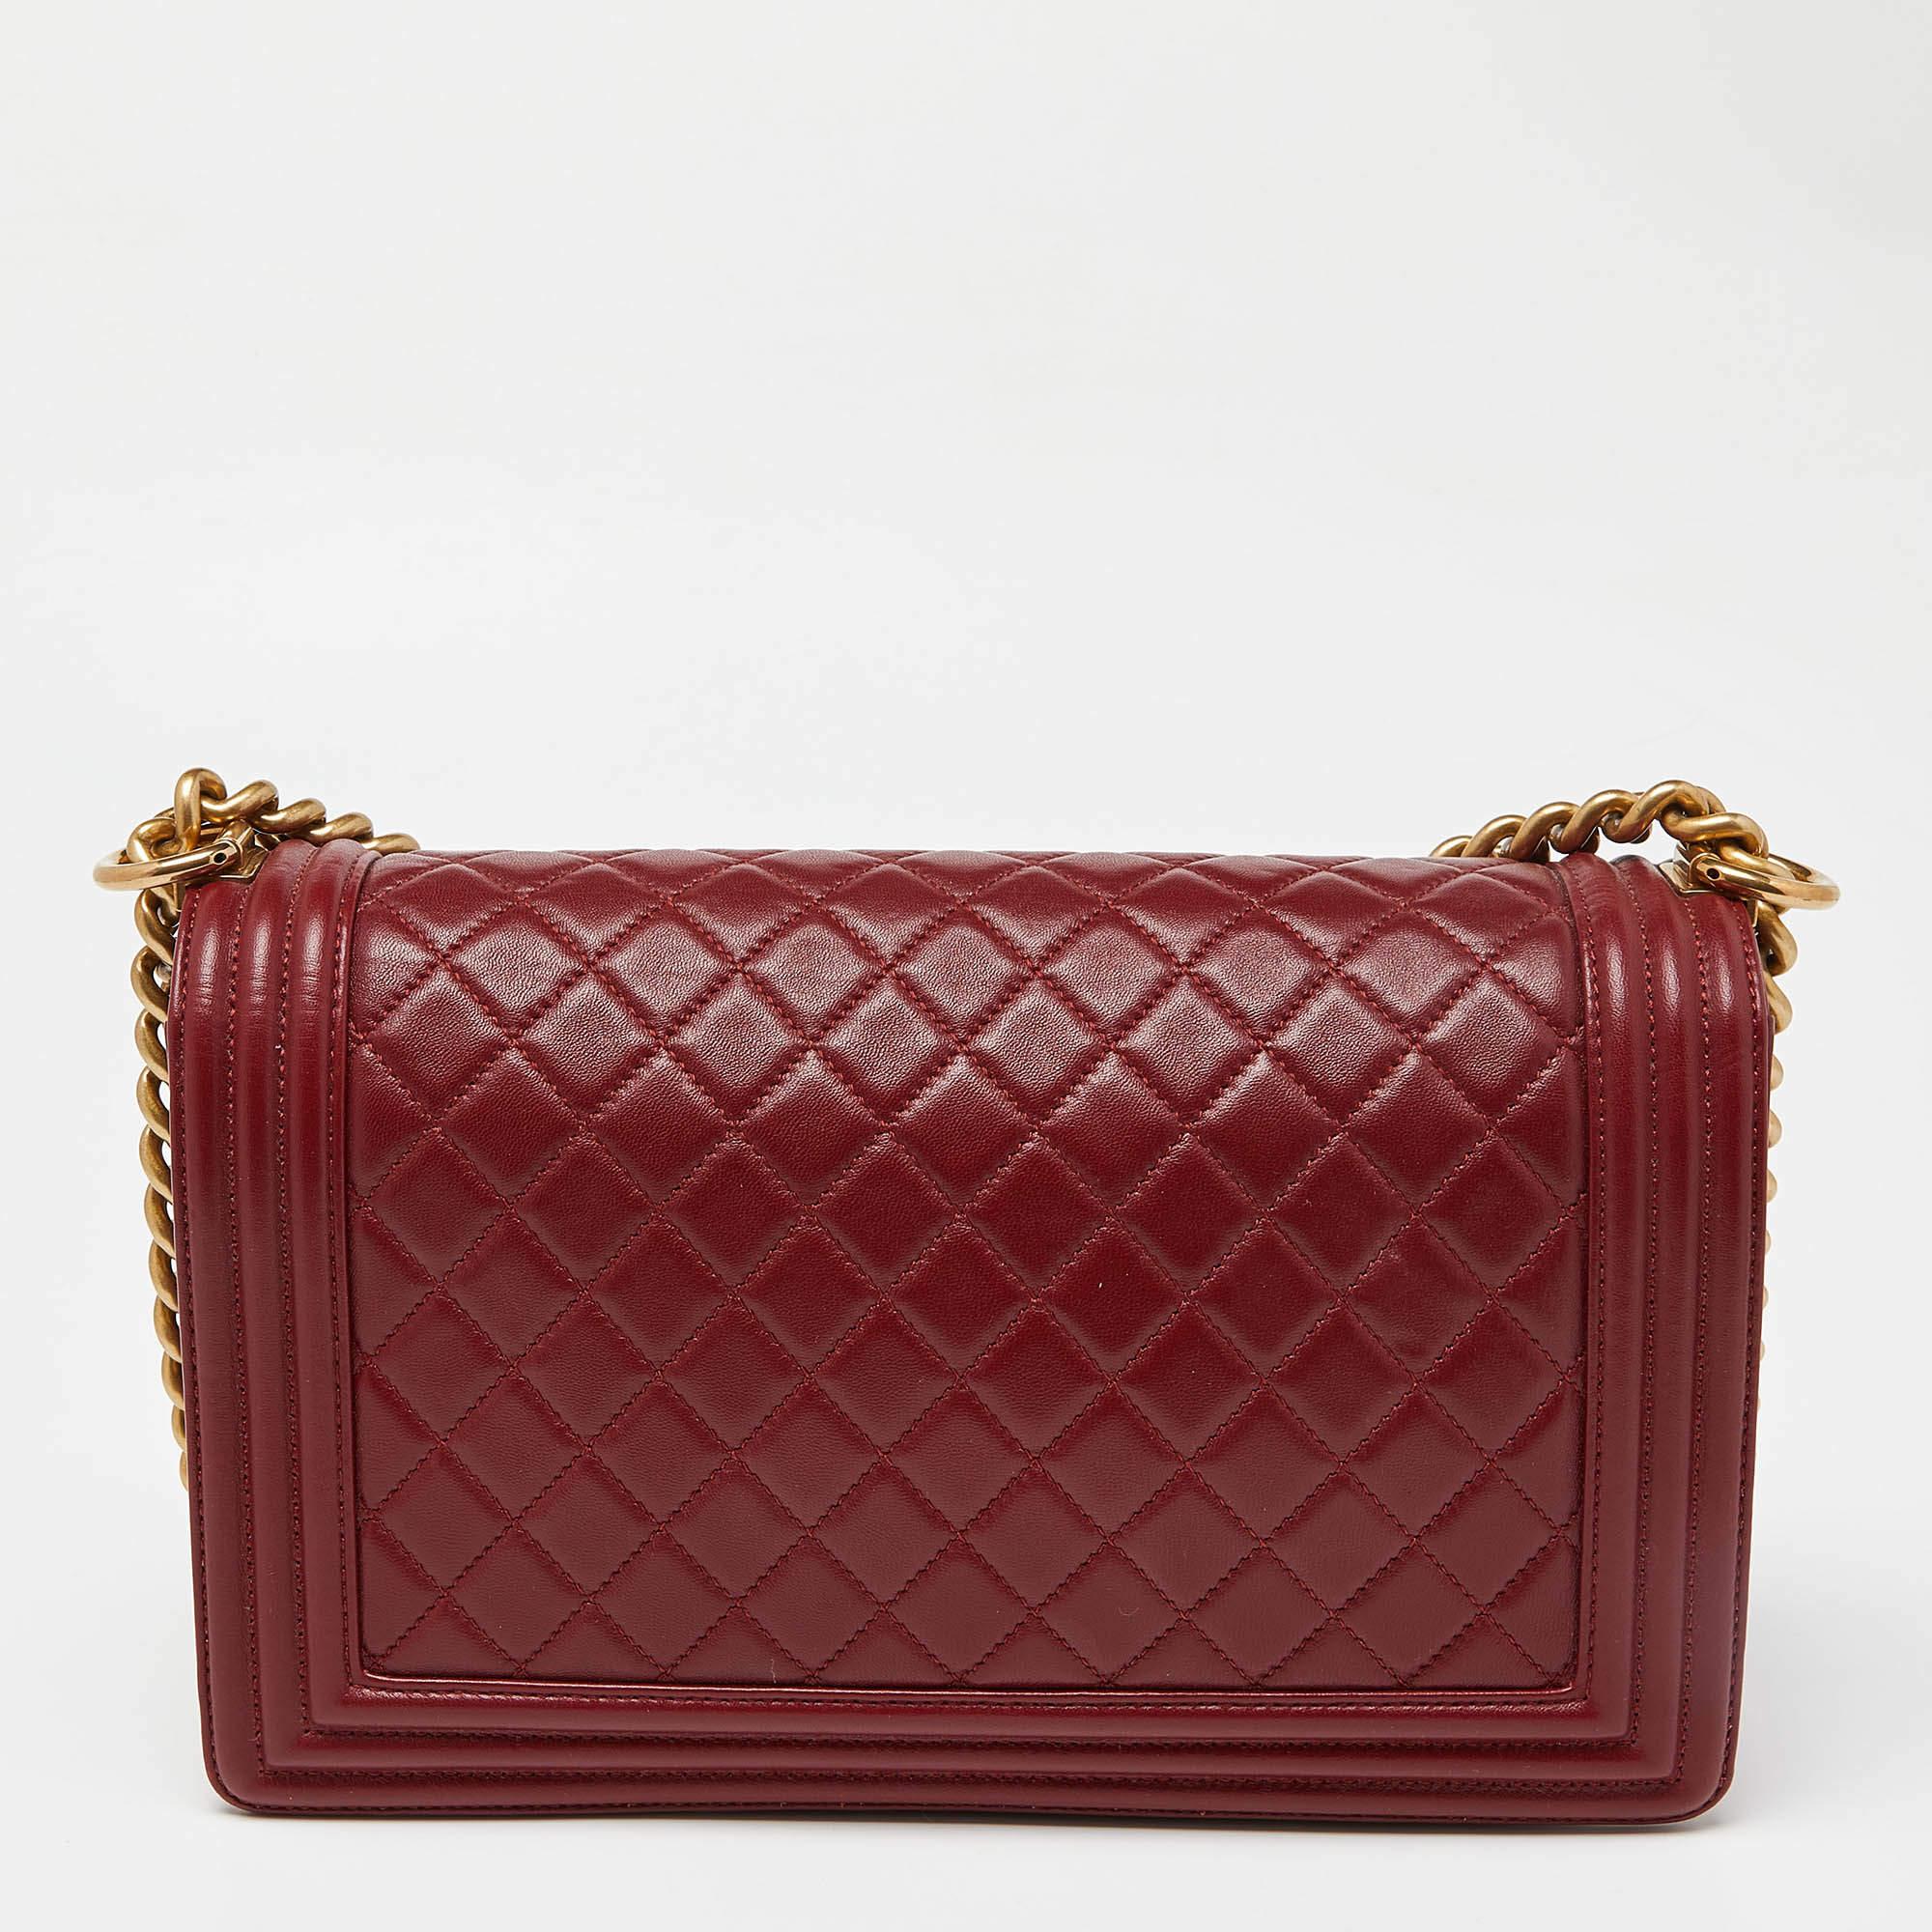 Chanel Red Quilted Leather New Medium Boy Shoulder Bag For Sale 4